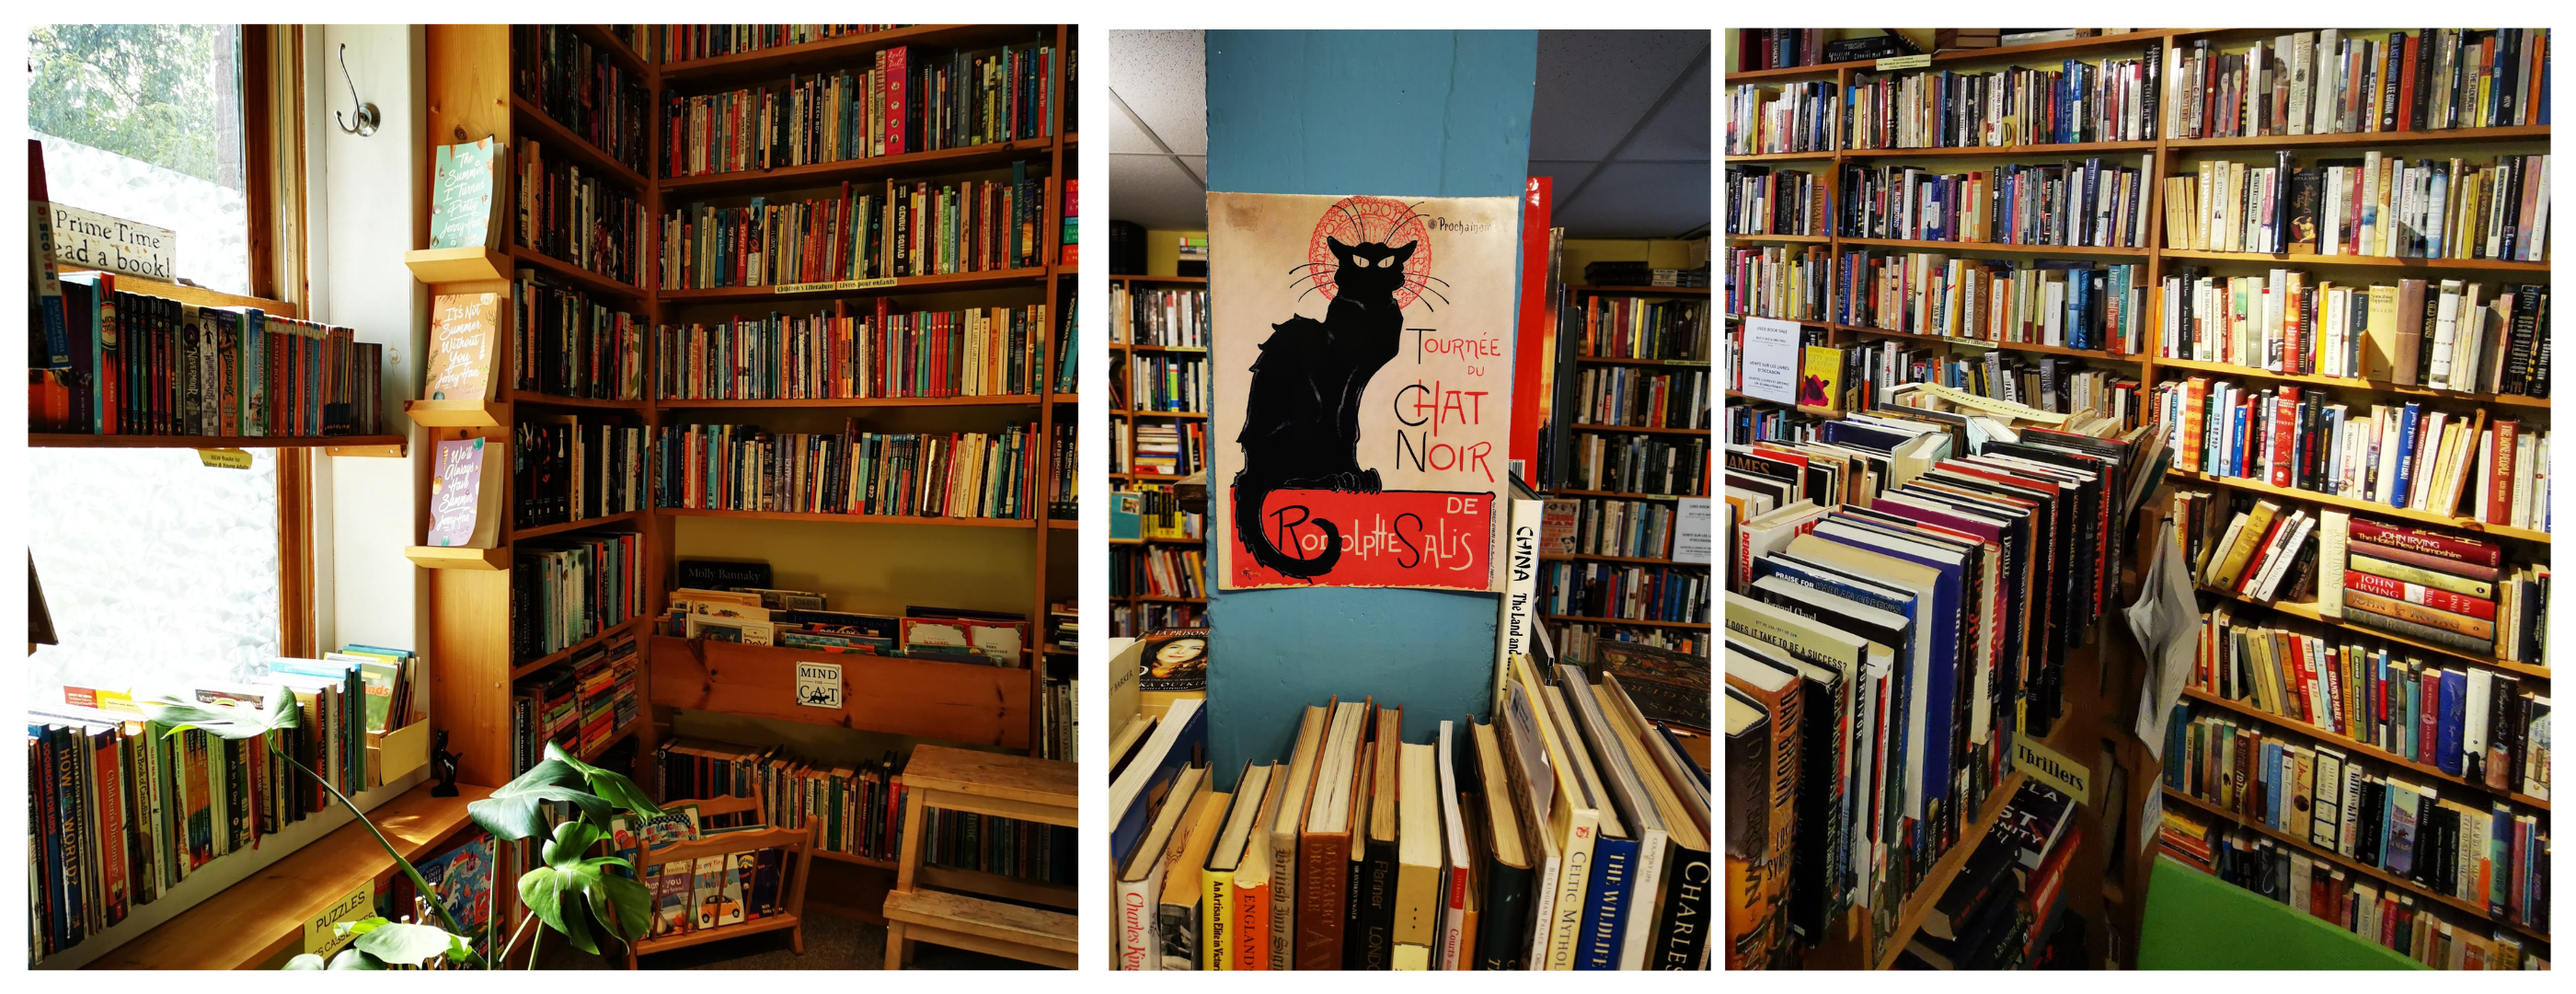 Photos of the interior of Black Cat Books including books and the inside of the store window.